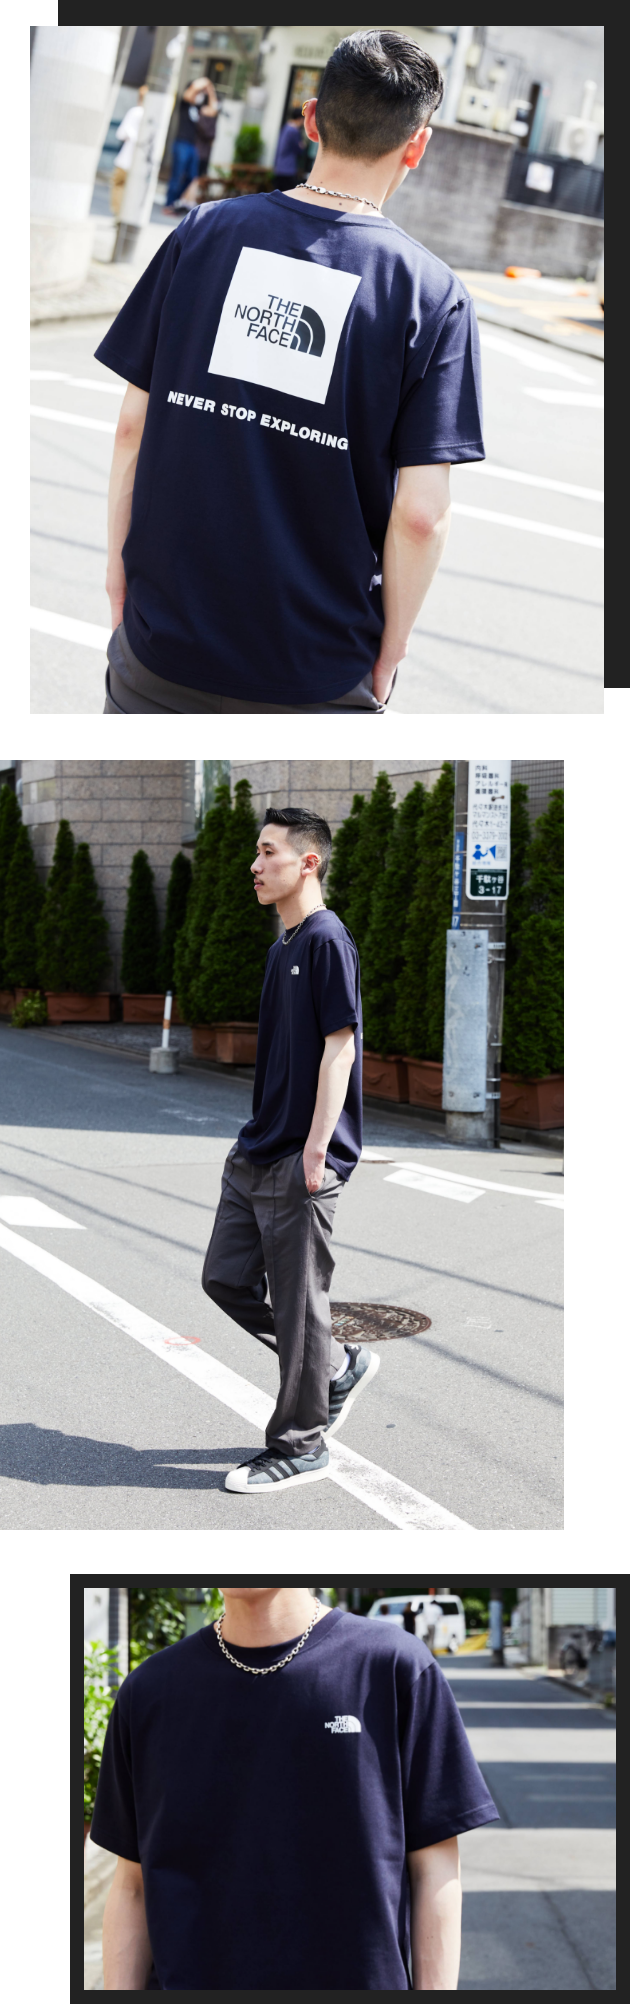 THE NORTH FACE Tシャツ特集